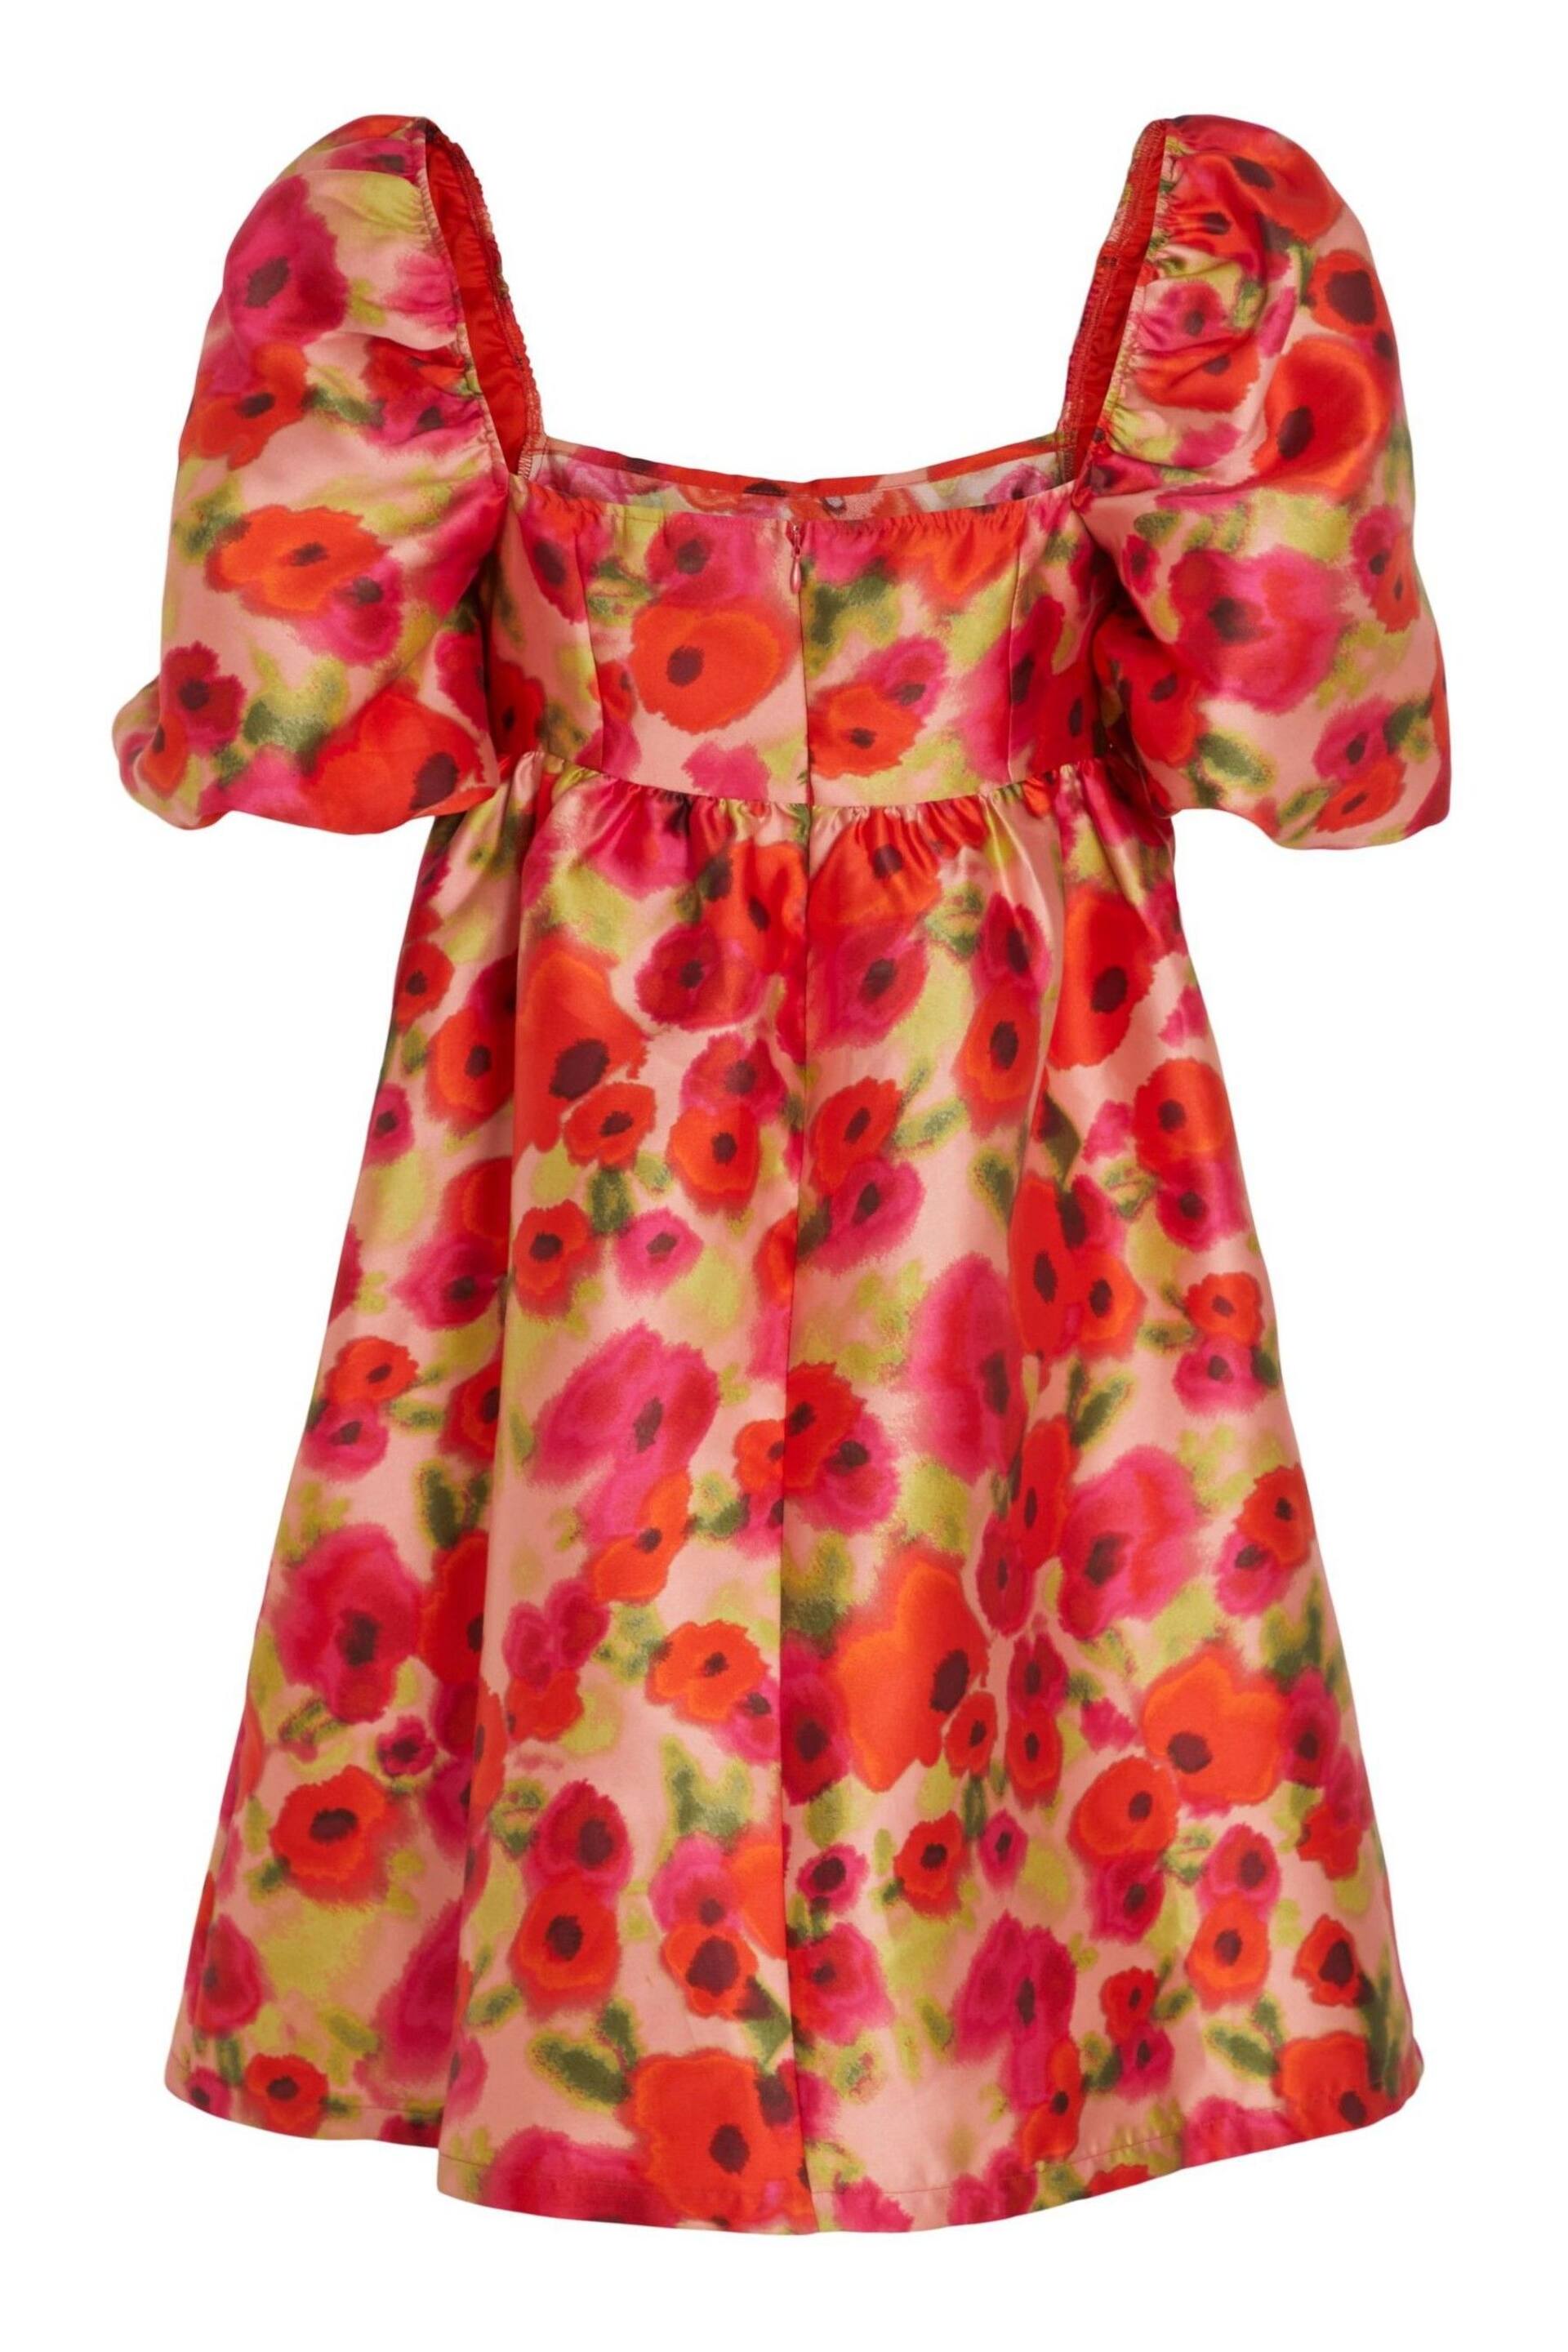 VILA Red Floral Baroque Puff Sleeve Mini Occasion Dress - Image 7 of 7